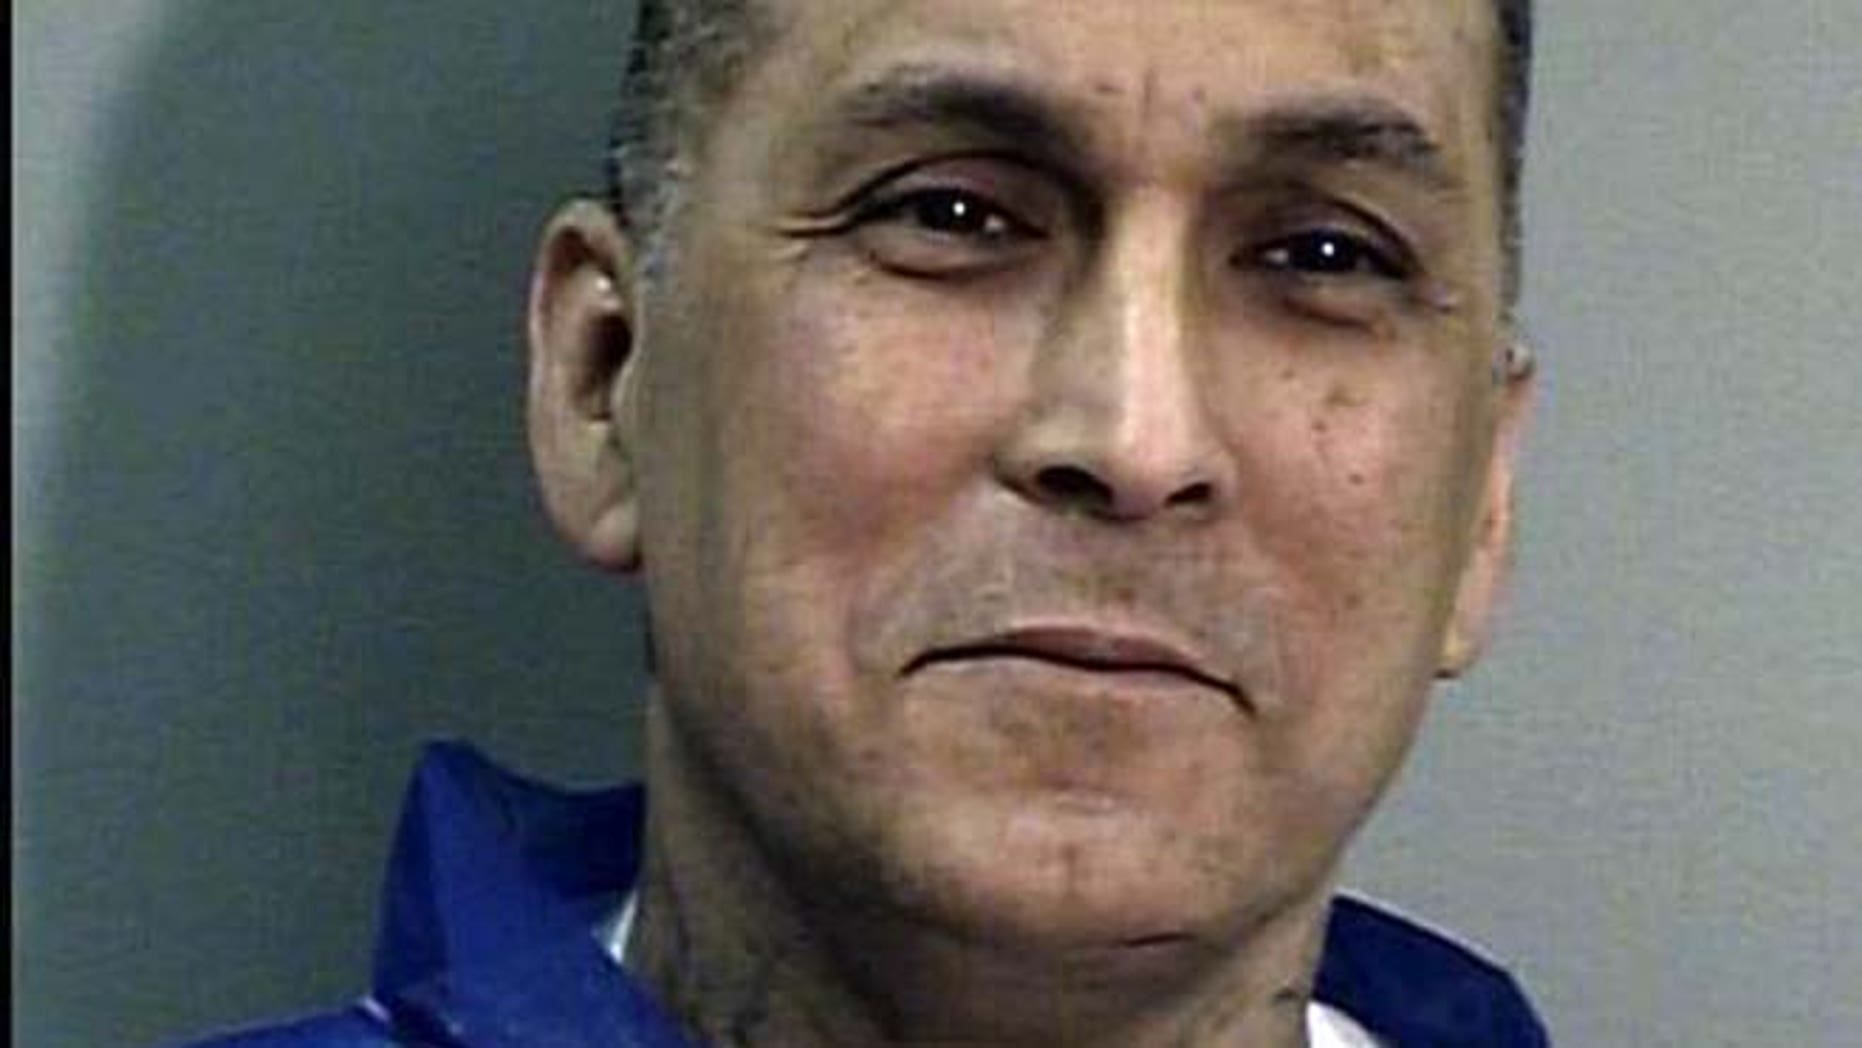 Los Angeles police reportedly spent 22,000 to get exMexican Mafia